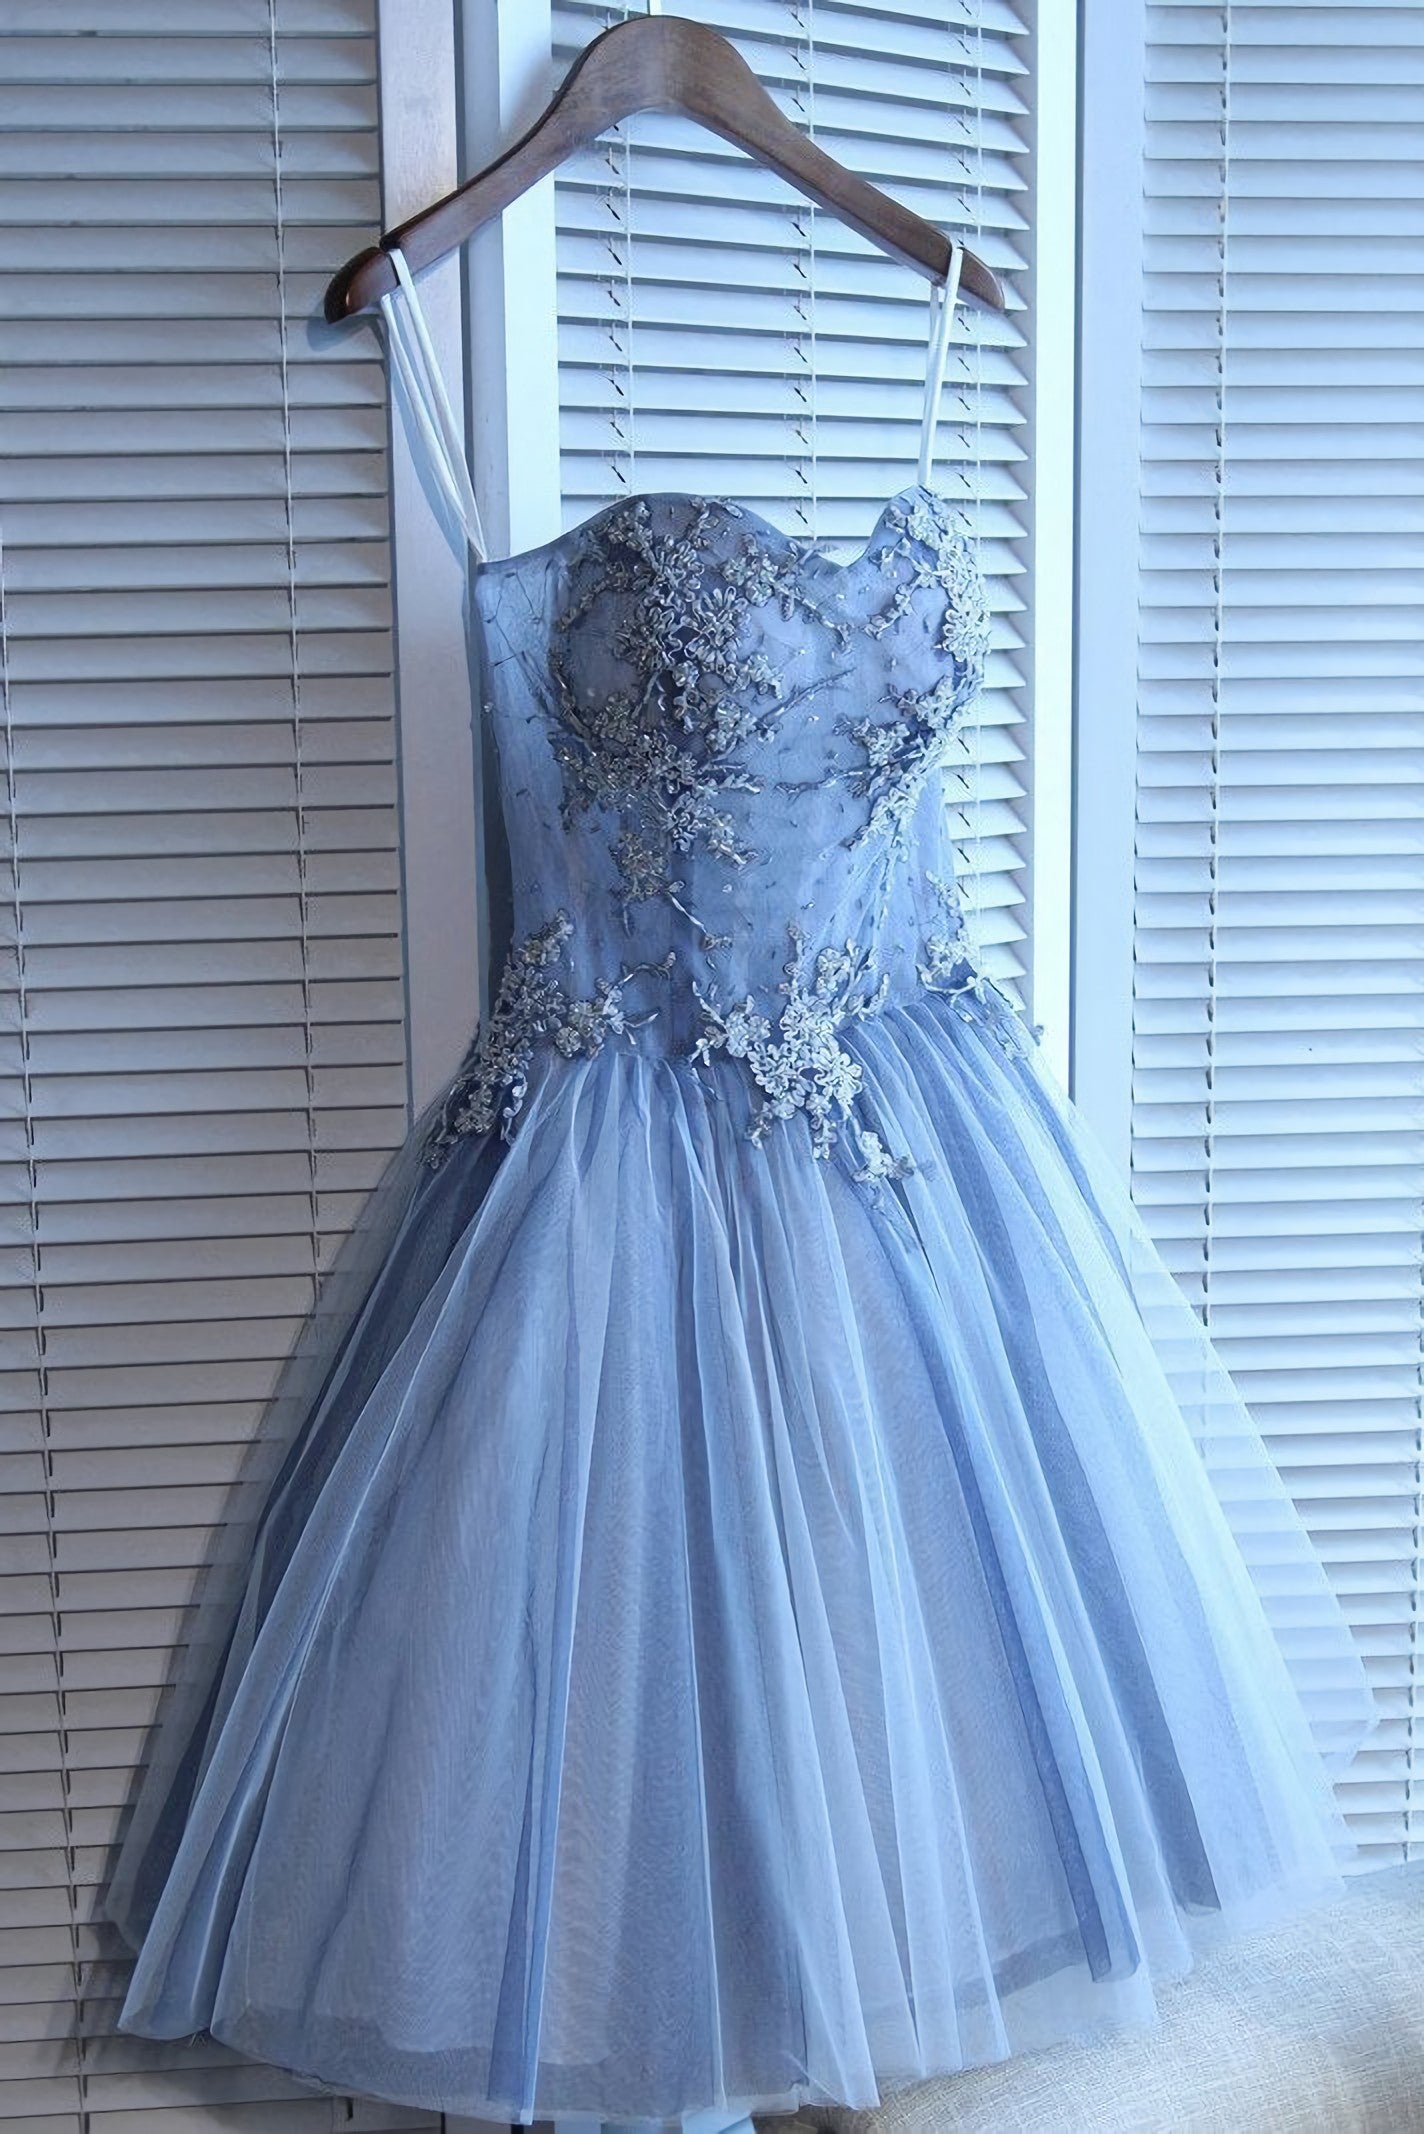 Sweetheart Strapless Homecoming Dresses, Beads Blue Lace Up Tulle Short Prom Dresses